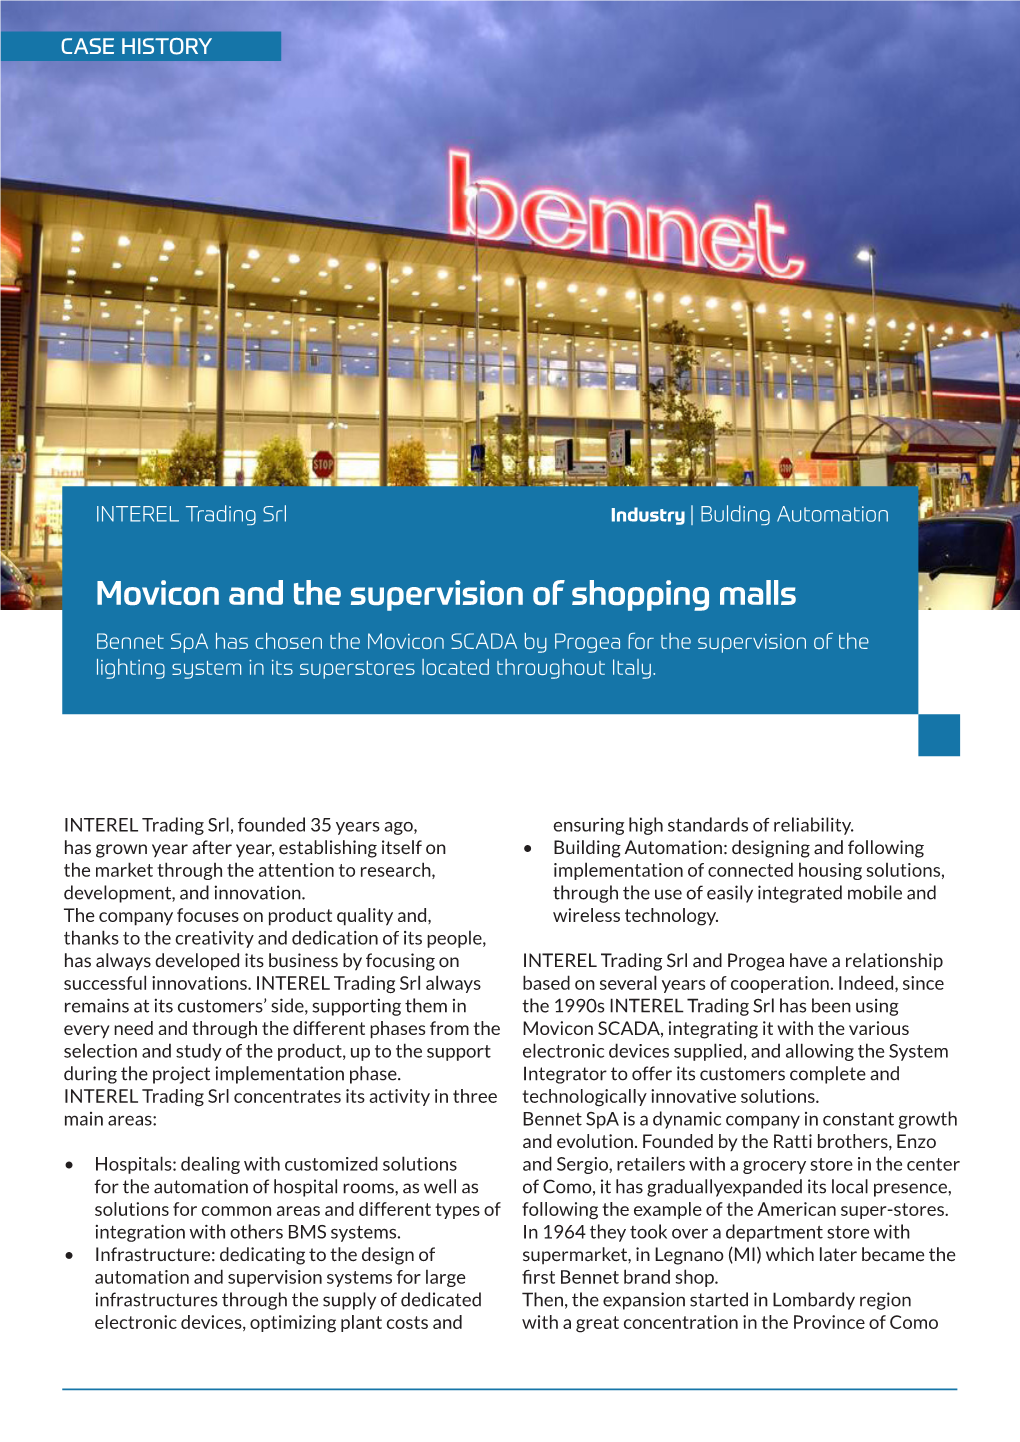 Movicon and the Supervision of Shopping Malls